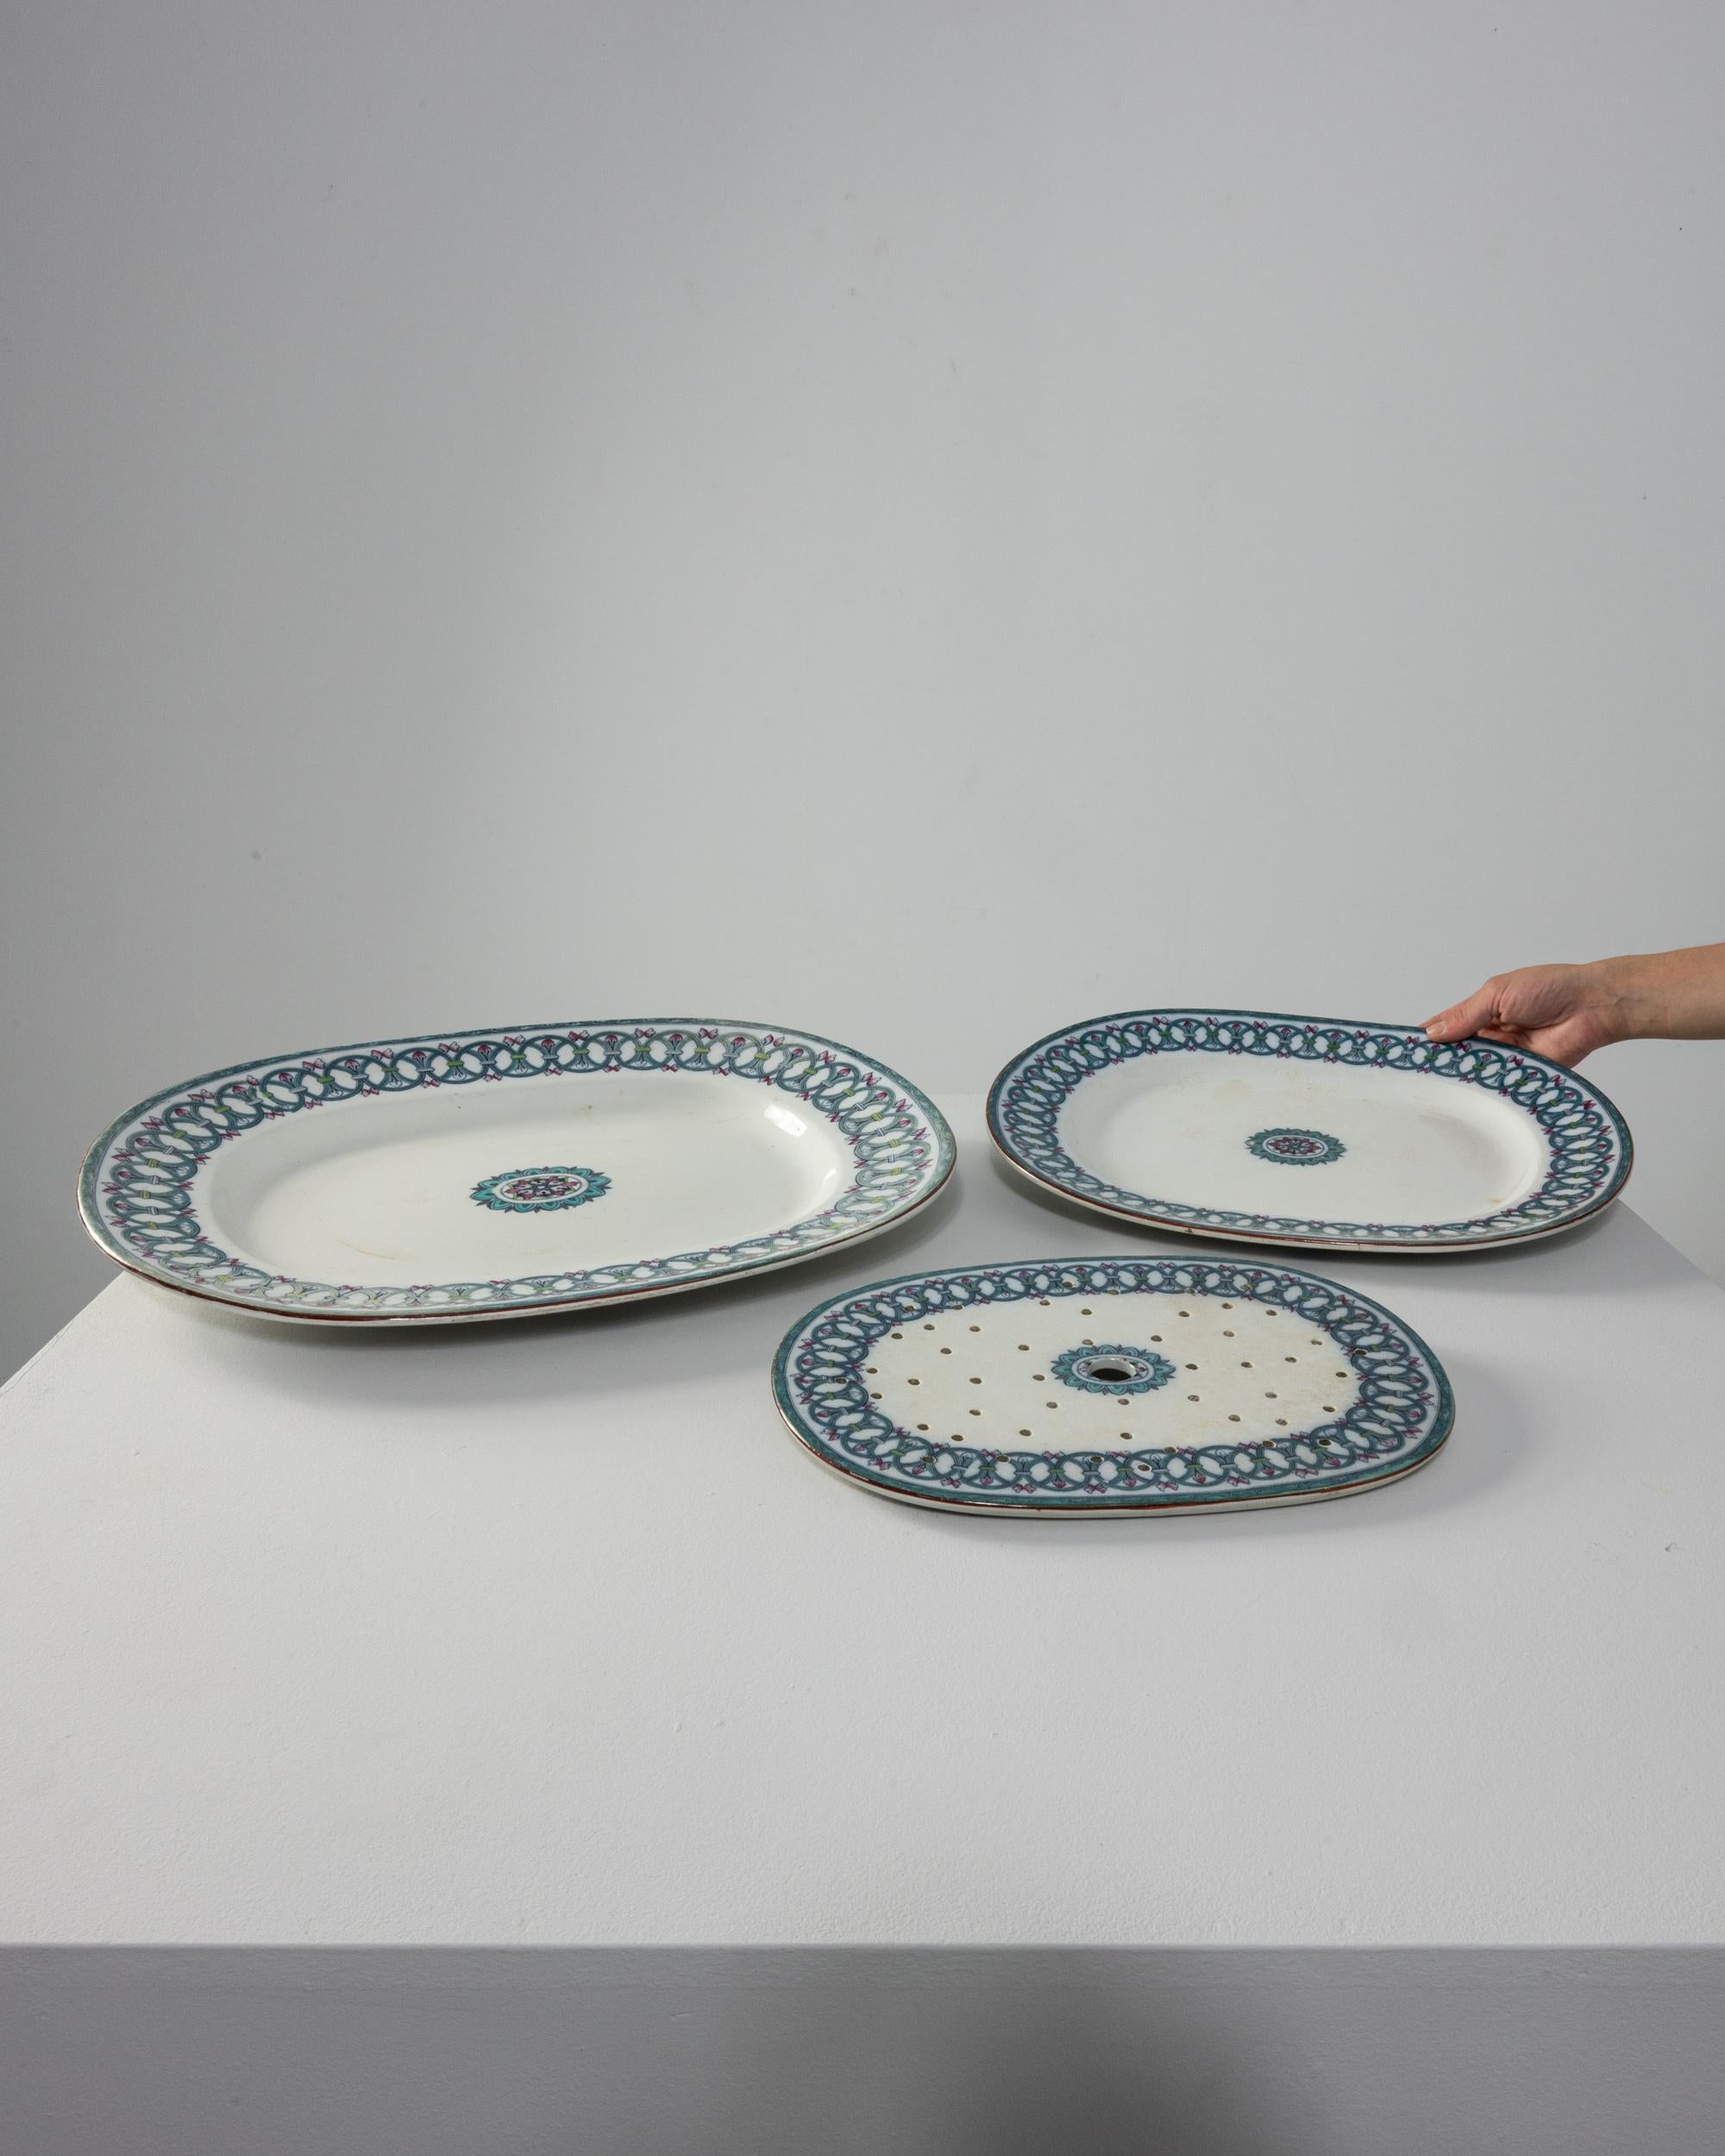 1920s British Serving Platters, Set of Three In Good Condition For Sale In High Point, NC